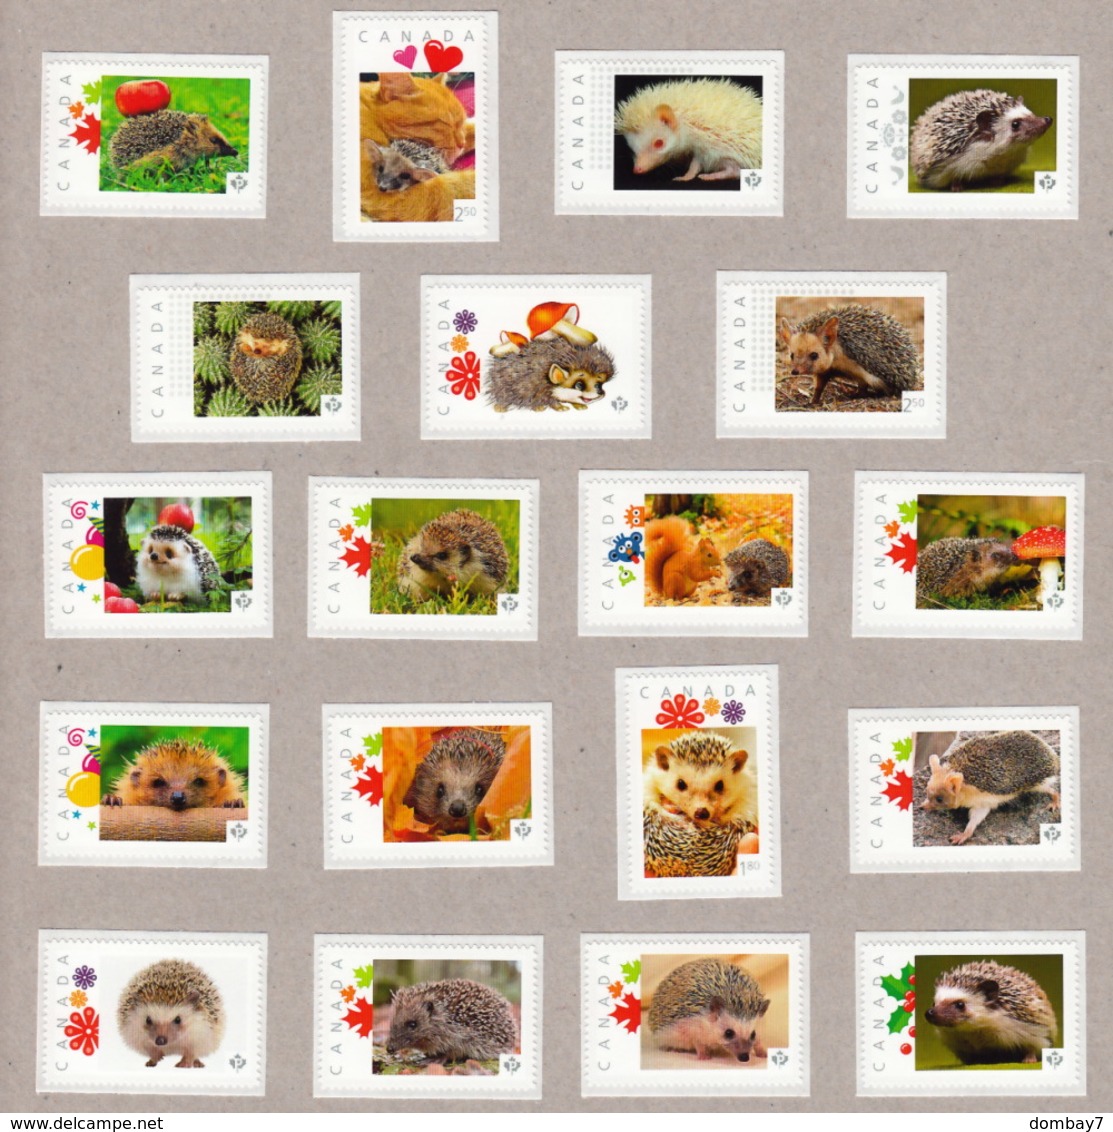 HEDGEHOG, ERIZO, RICCIO, IGEL, Hérisson MNH Stamps LIMITED! ONLY 2 Collection Available! ONLY HERE! Canada 2014-2015 - Rodents